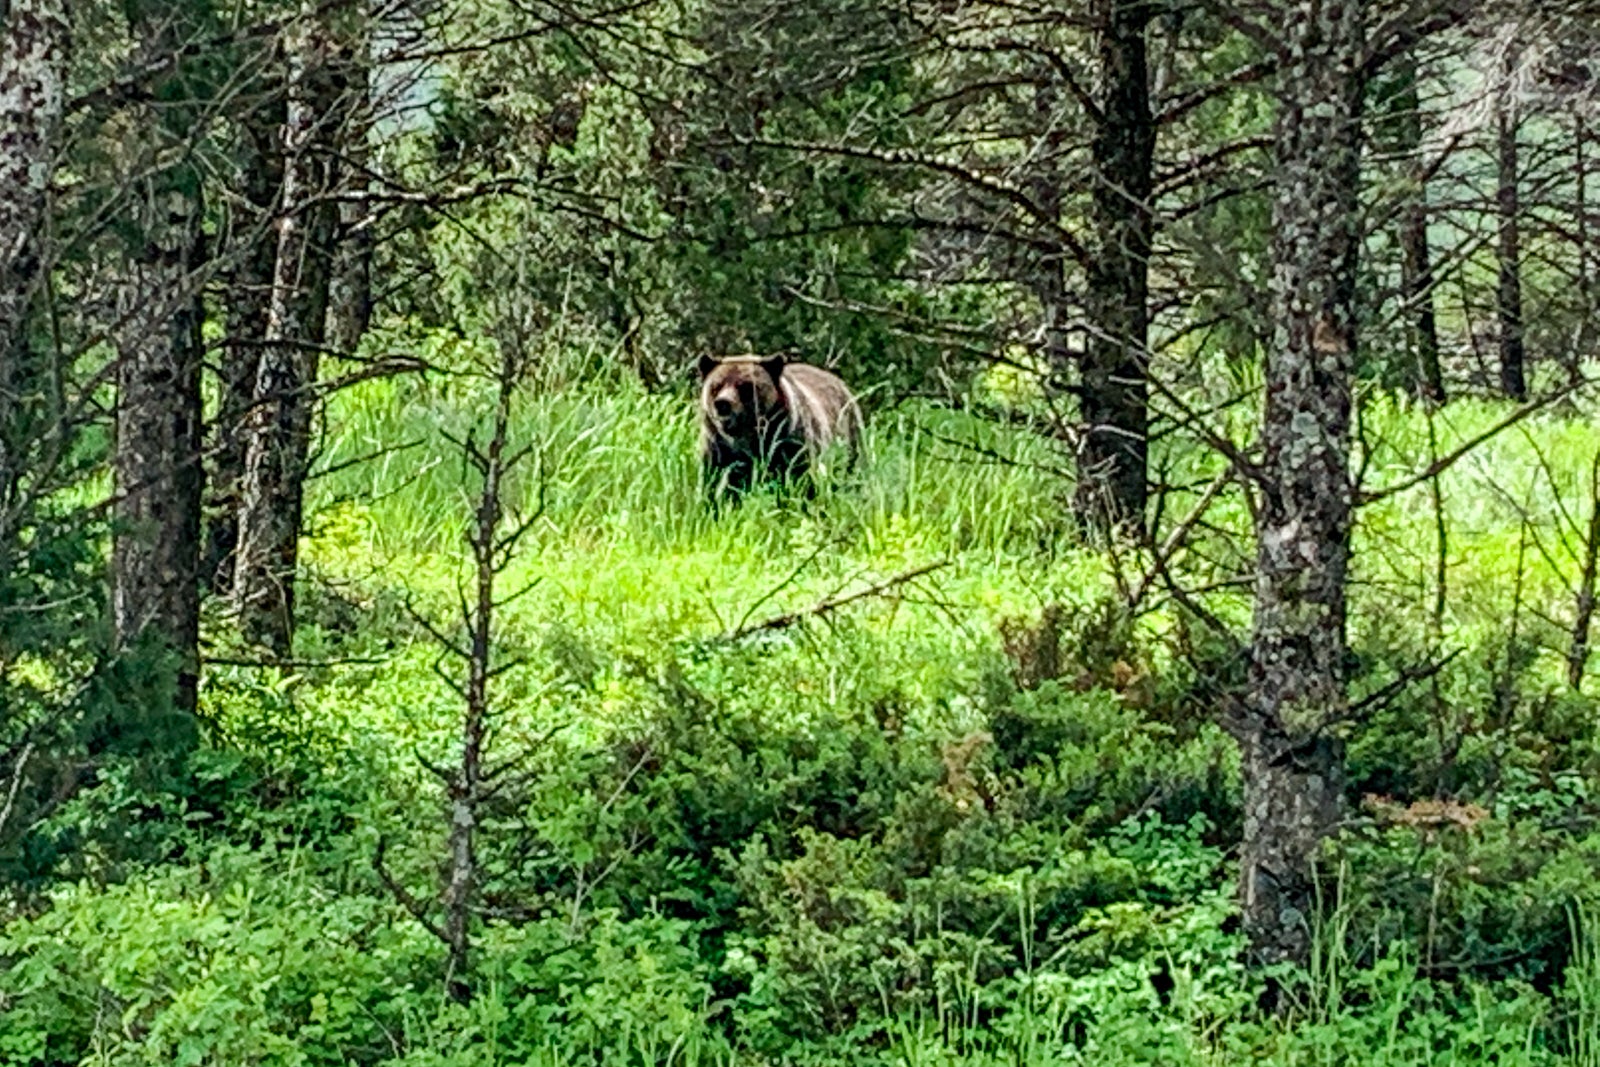 Grizzly bear in Yellowstone National Park June 2020. (Photo by Clint Henderson/The Points Guy)